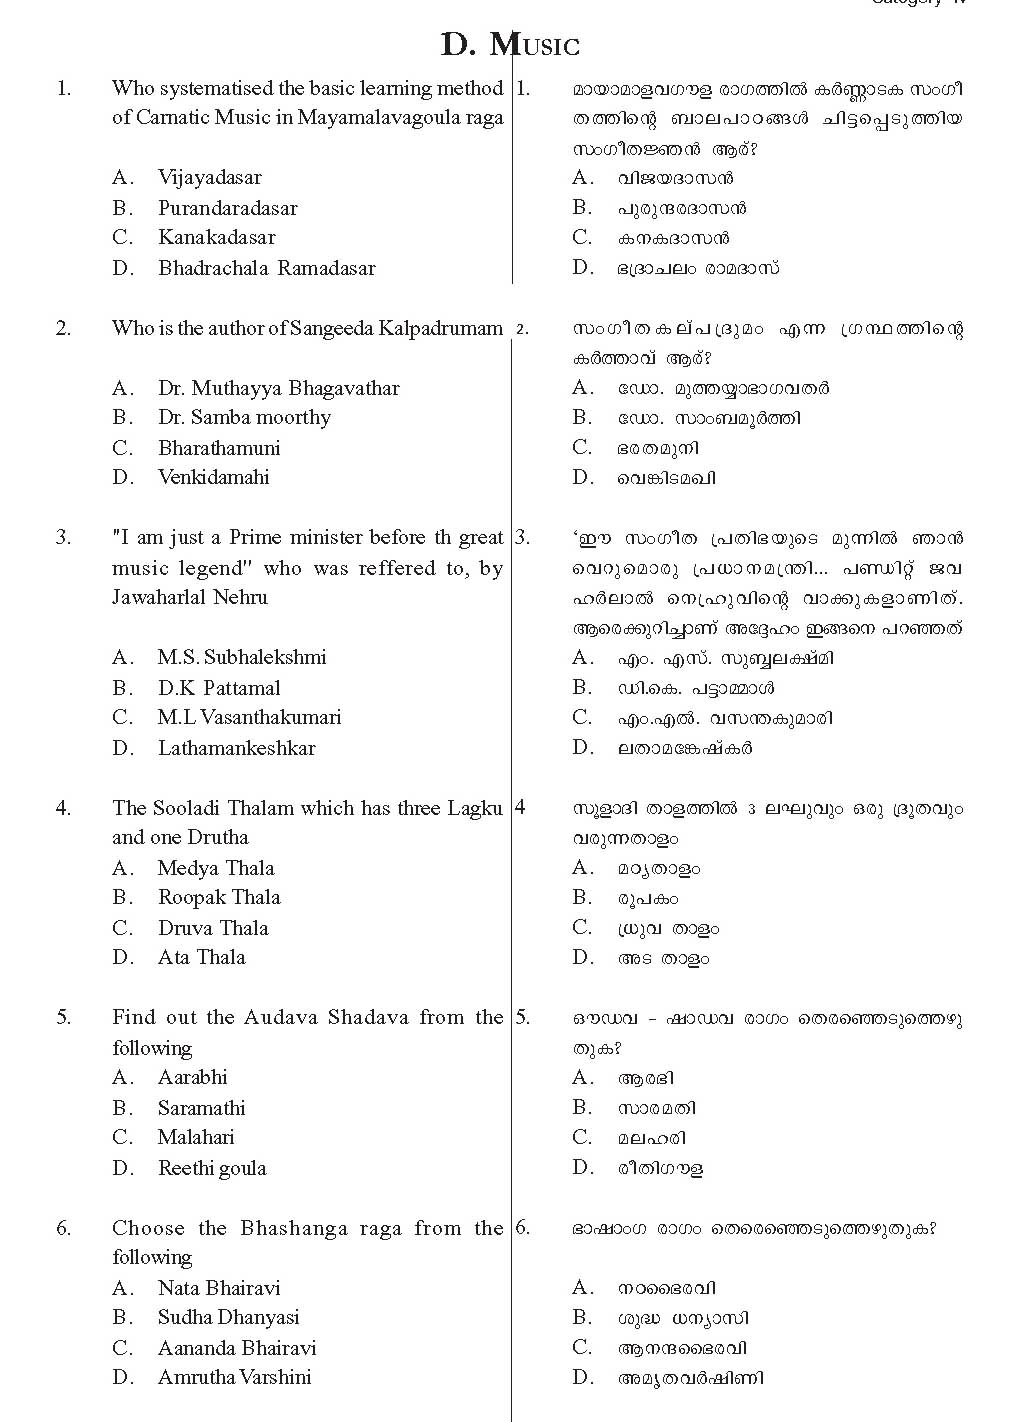 KTET Category IV Music Teacher Exam Sample Question Paper with Answers